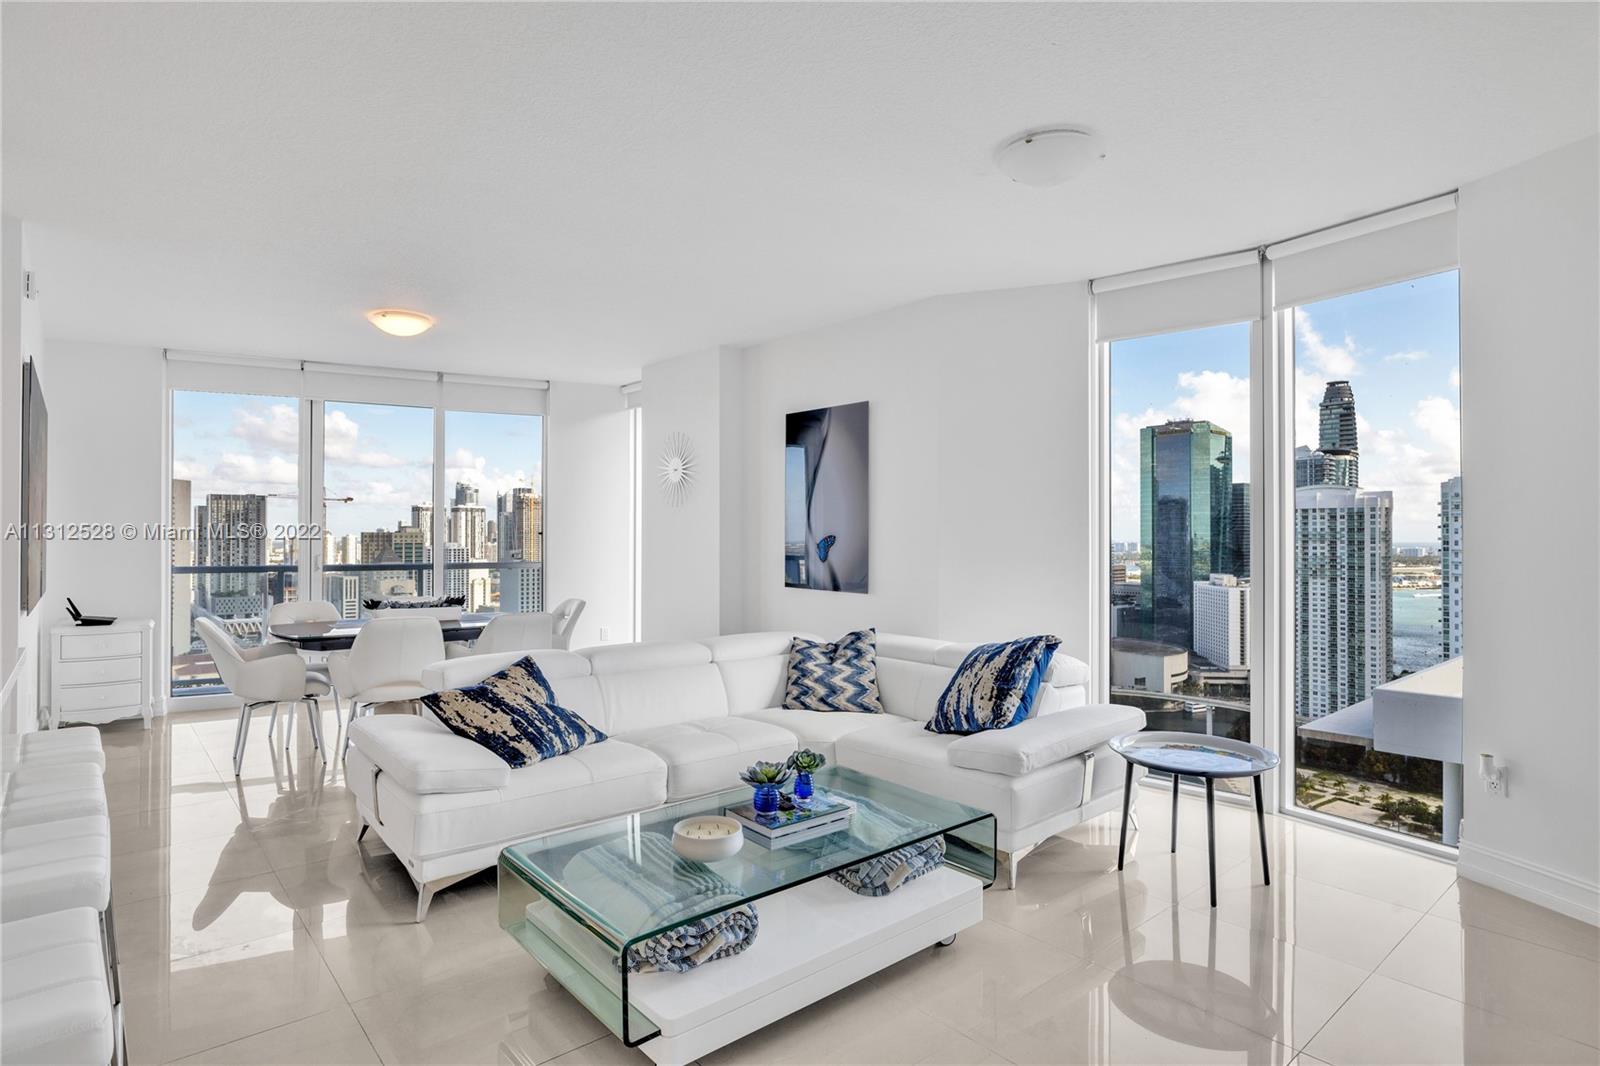 Beautiful panoramic river and city views in this turn-key, 3 bedroom and 3 bathroom condo at Latitude. Unit is impeccable and ready for the Buyer to move-in. Building is just steps from Brickell City Centre. ! assigned parking. *Not subject to appraisal. Easy to show with a 24-hr notice. Text agent.